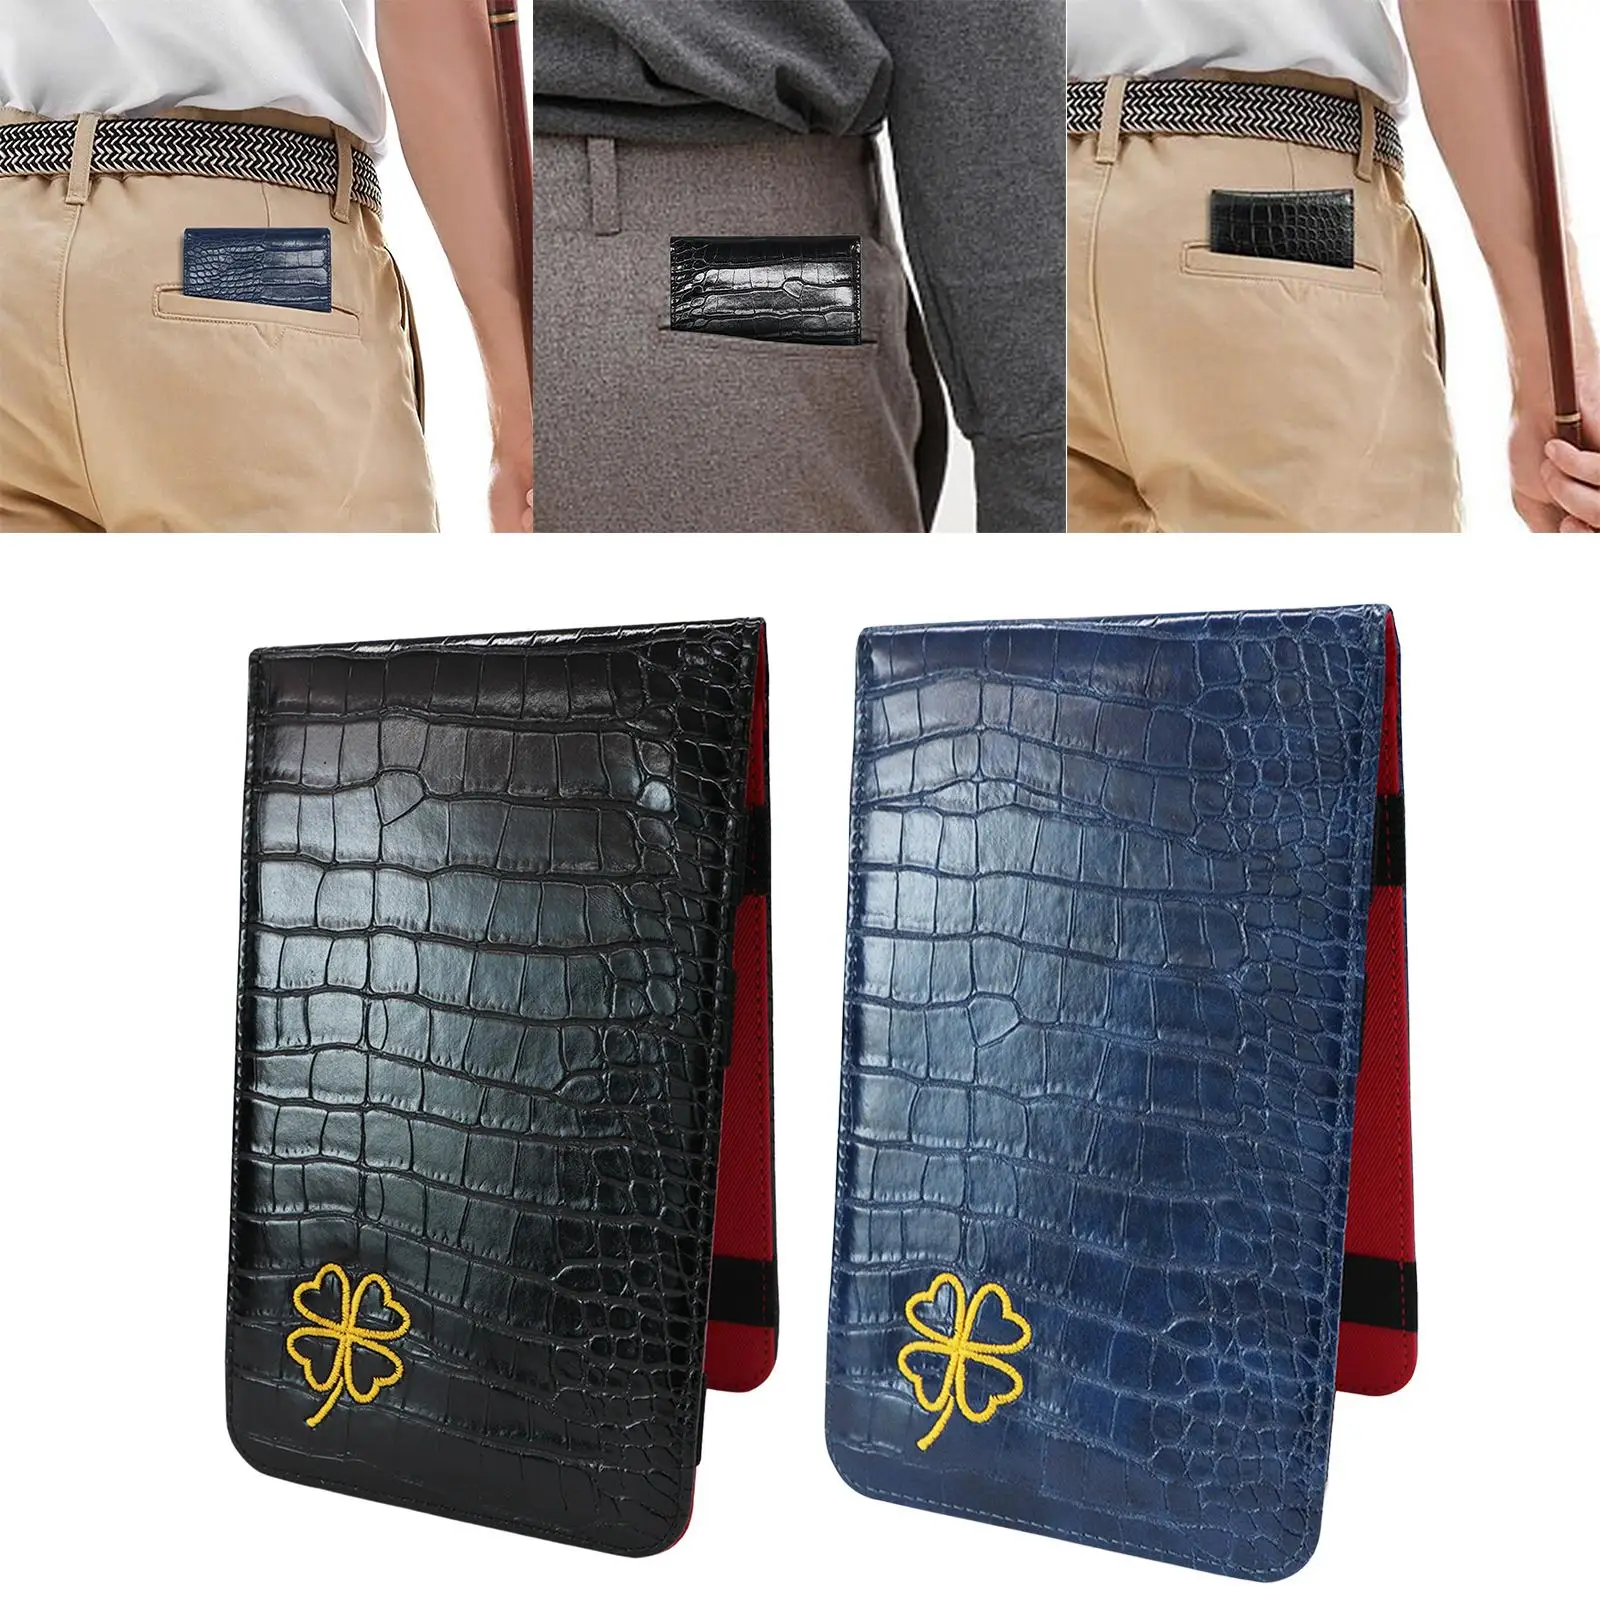 PU Yardage Book Cover Golf Score Cards Wallet Gift Golf Accessories with Elastic Bands Portable Golf Scorecard Holder for Family